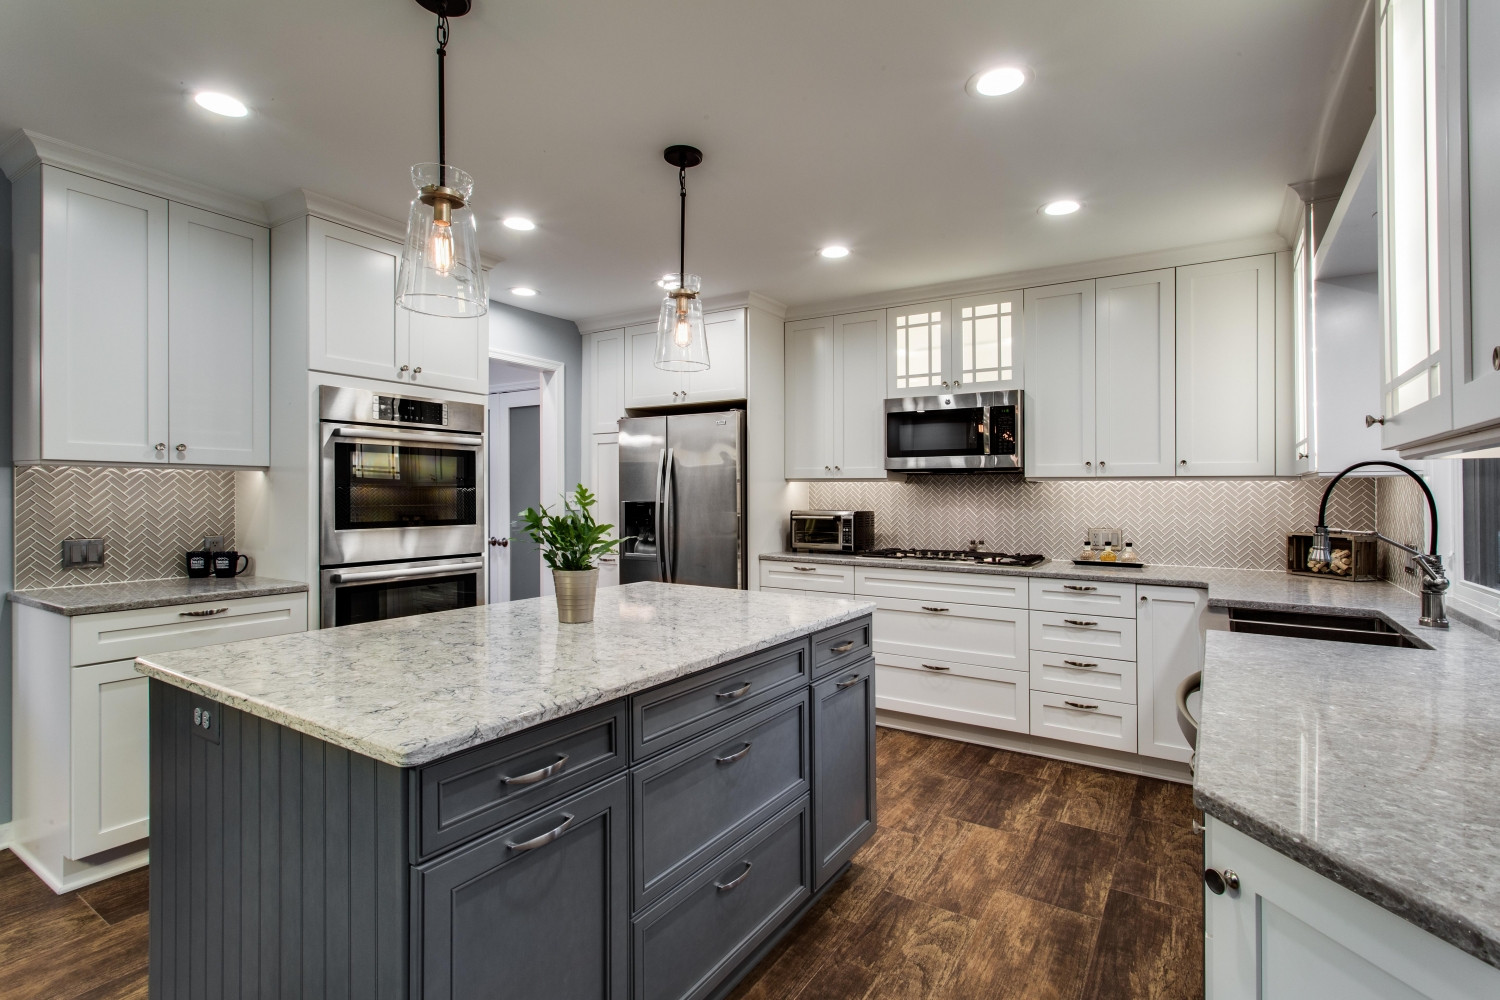 Kitchen Remodel Pictures
 The Best Kitchen Remodel For Your Money